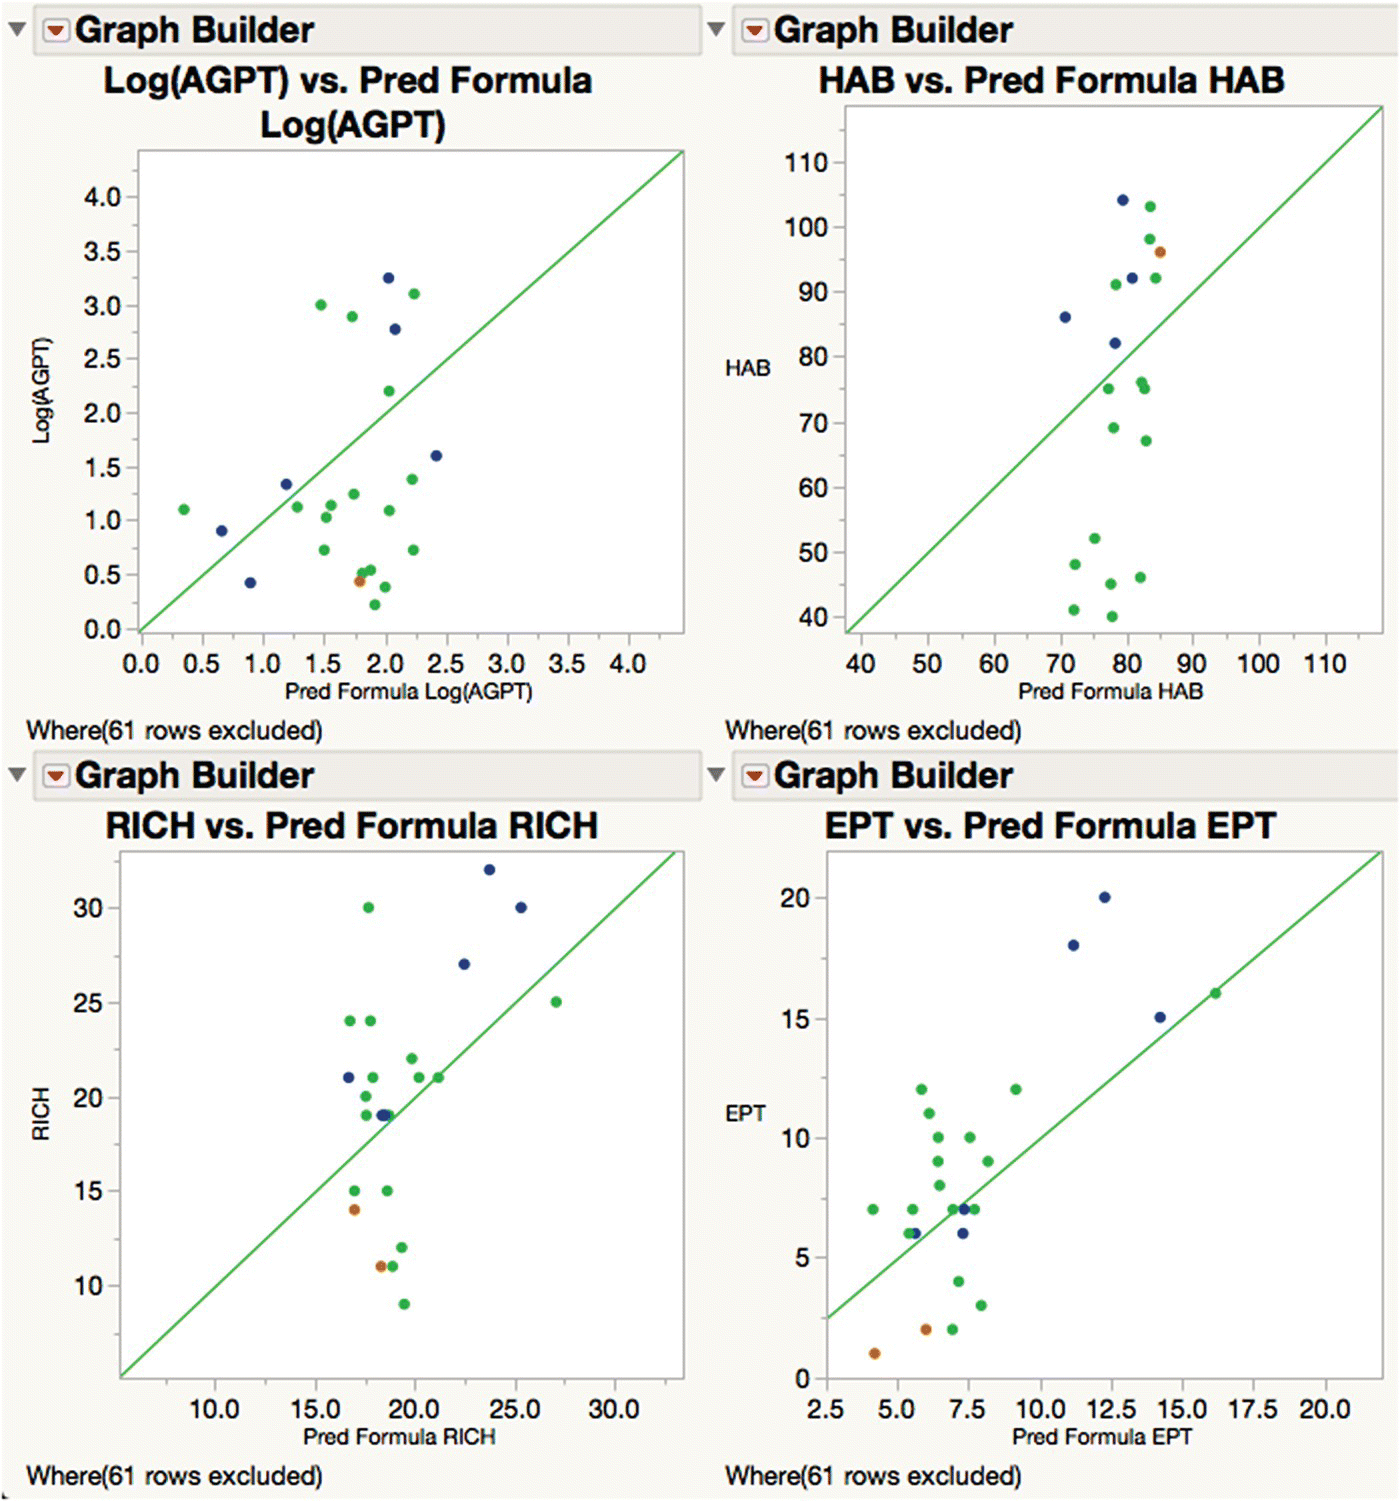 4 Scatterplots for prediction accuracy of the final PLS model for test data, displaying plots of Log(AGPT) vs. Pred Formula, HAB vs. Pred Formula HAB, RICH vs. Pred Formula RICH, and EPT vs. Pred Formula EPT.